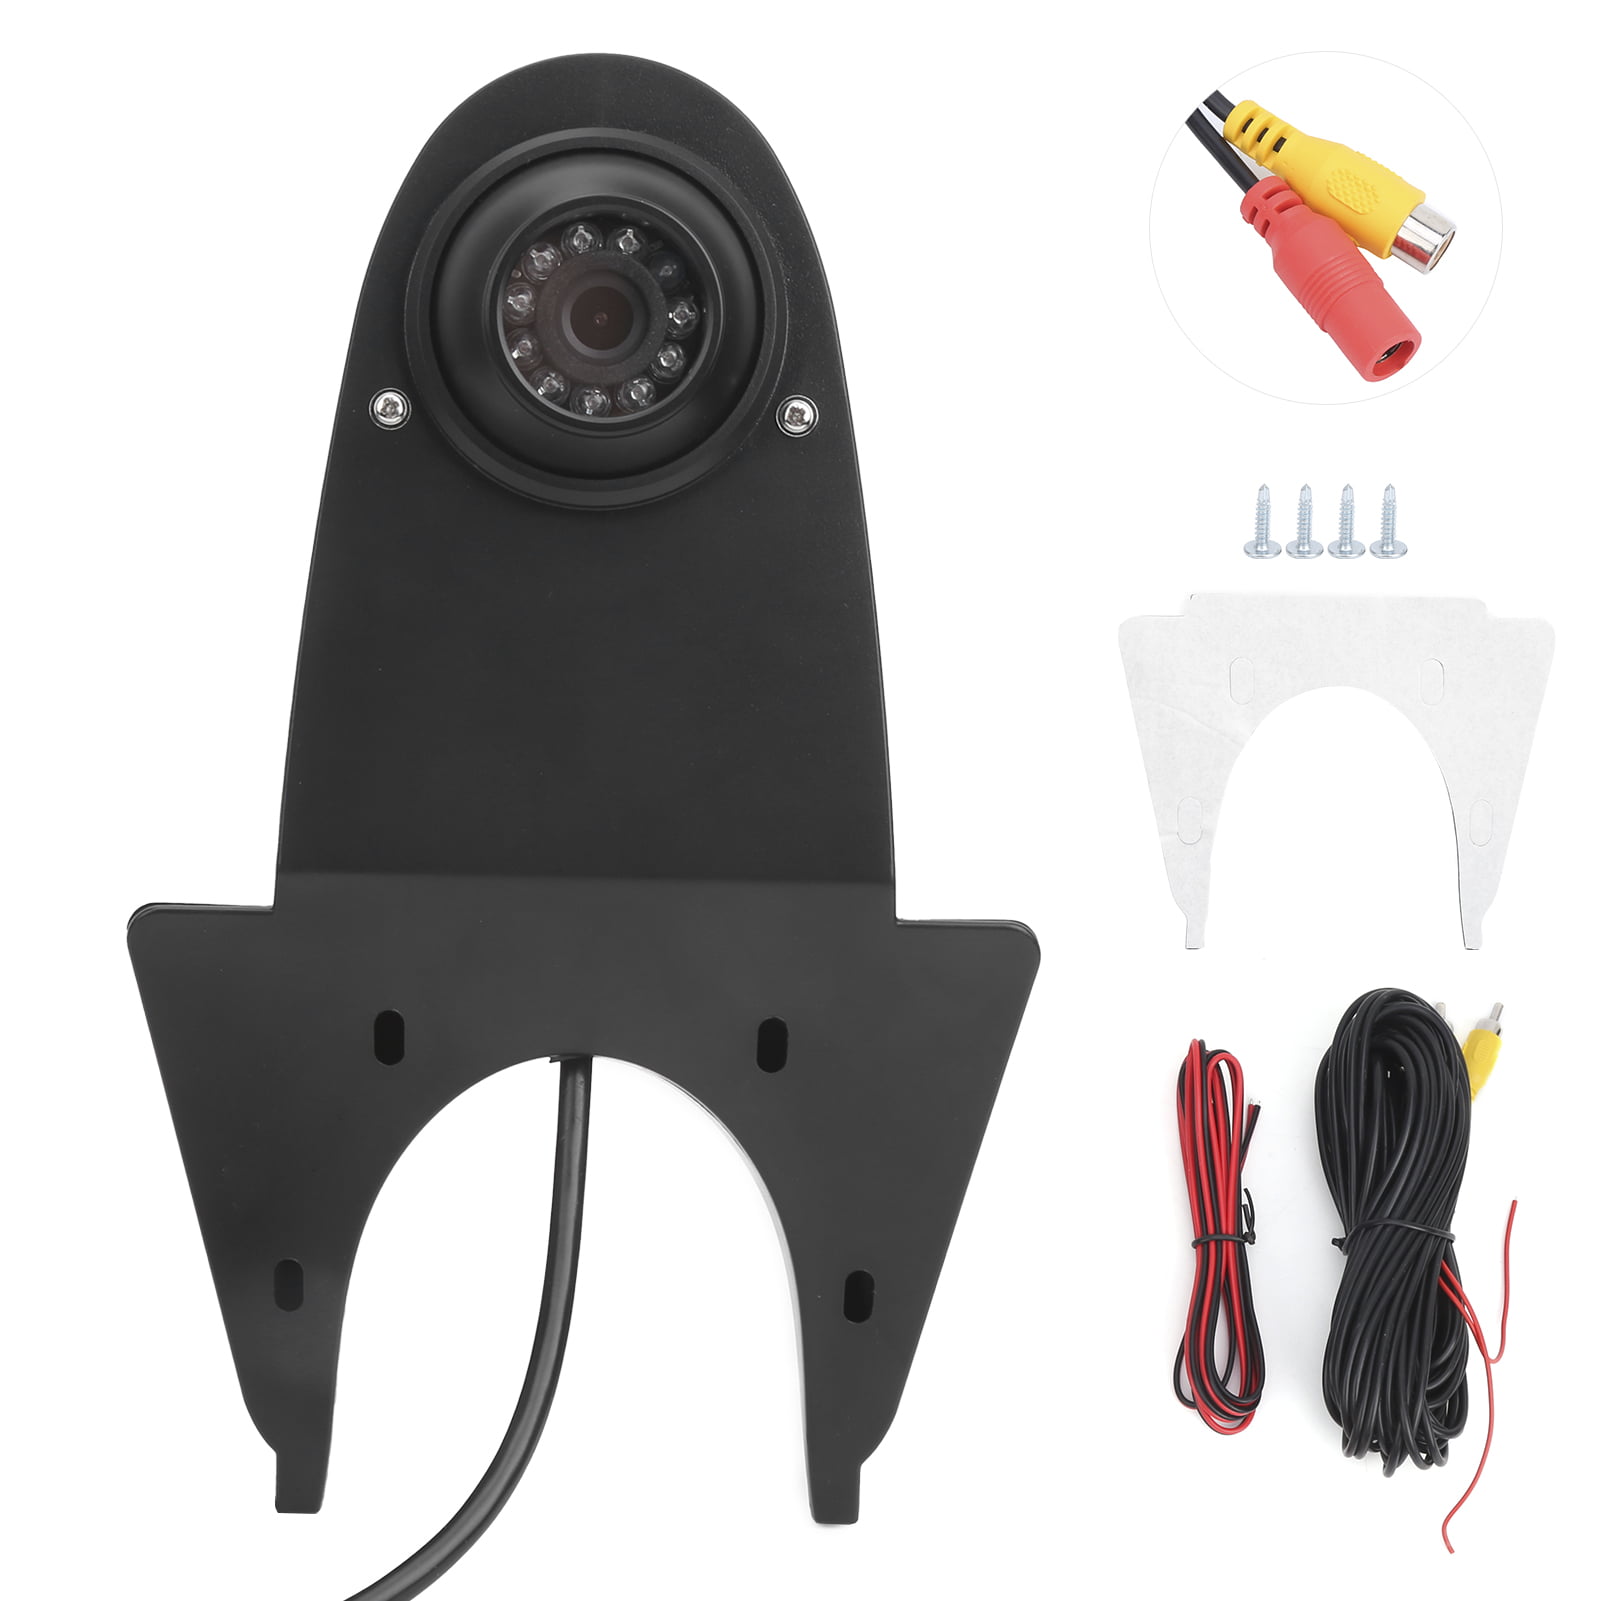 LED Rear View Camera 120° Wide Angle IP68 Waterproof For Benz Viano/Sprinter/Vit